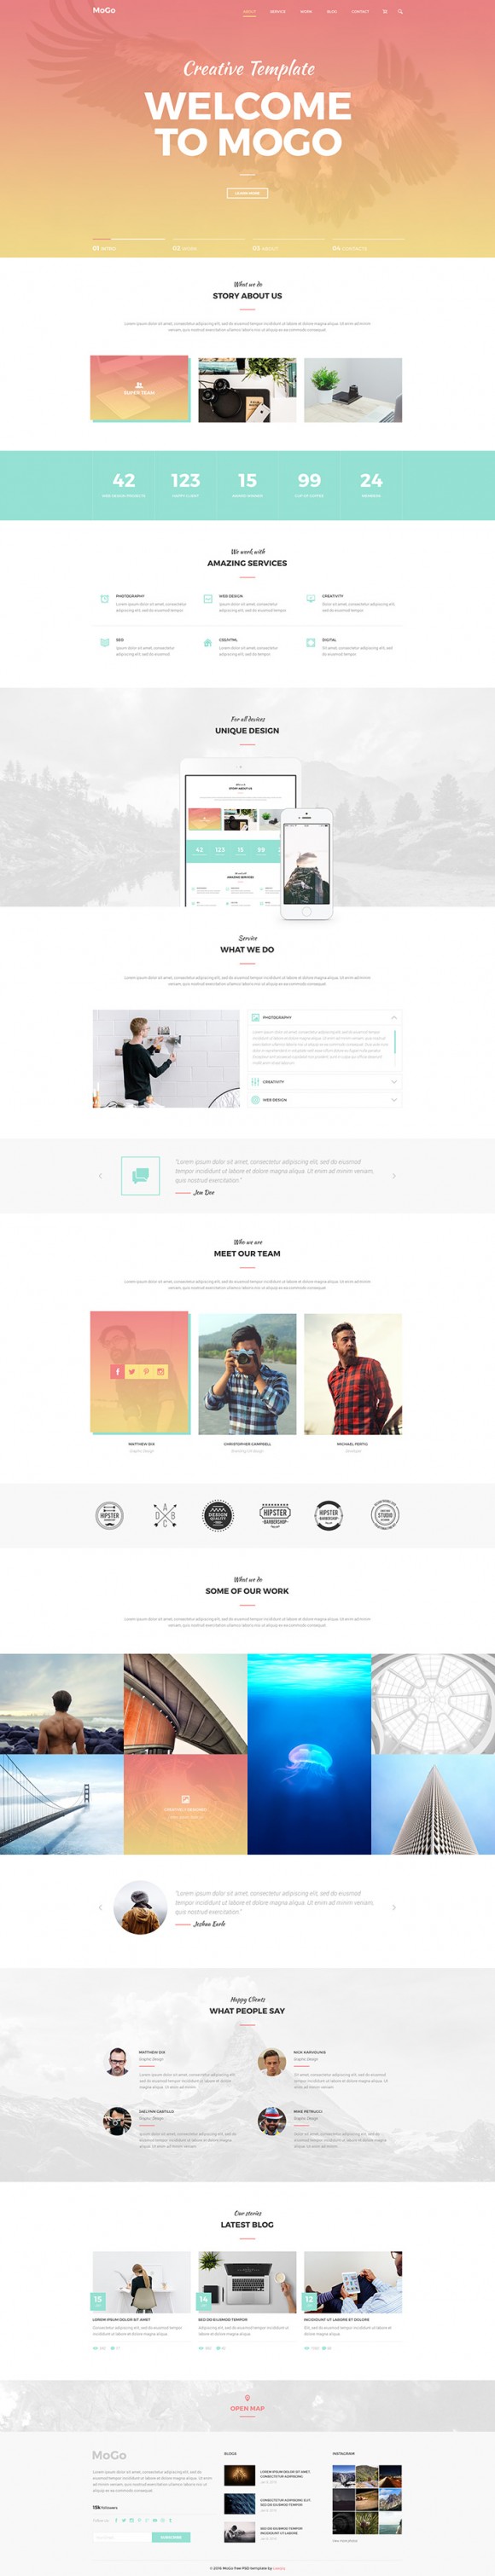 MoGo: Free one page PSD template - Preview image